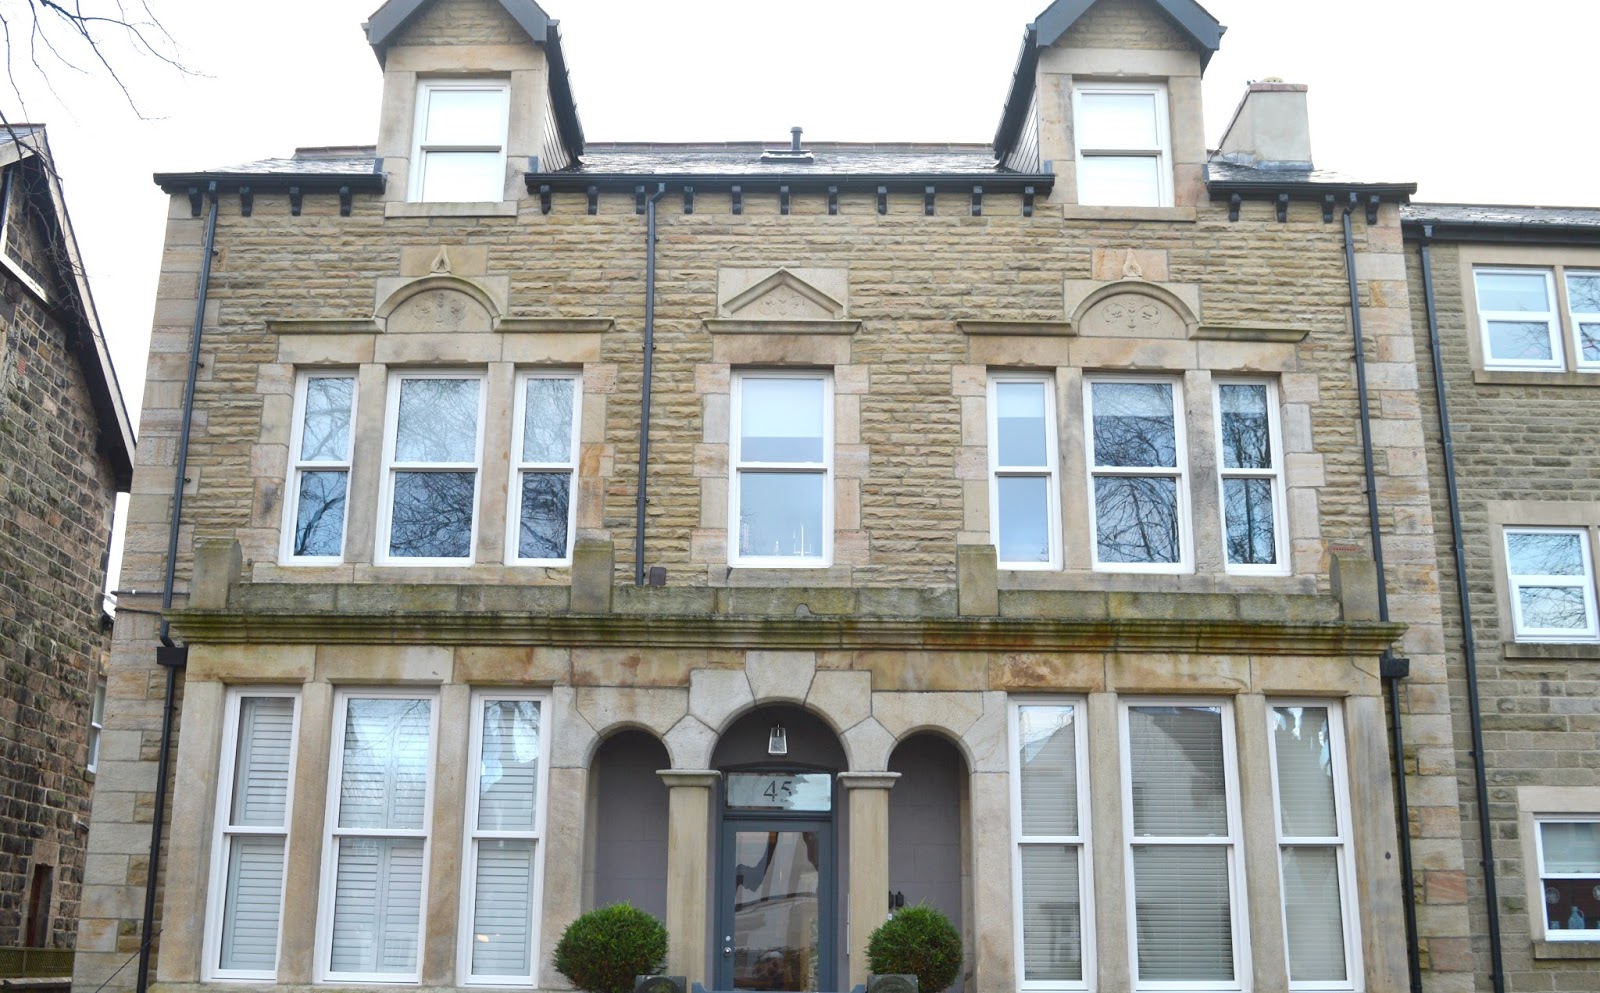  St George's Four One Bed Apartment in Harrogate 